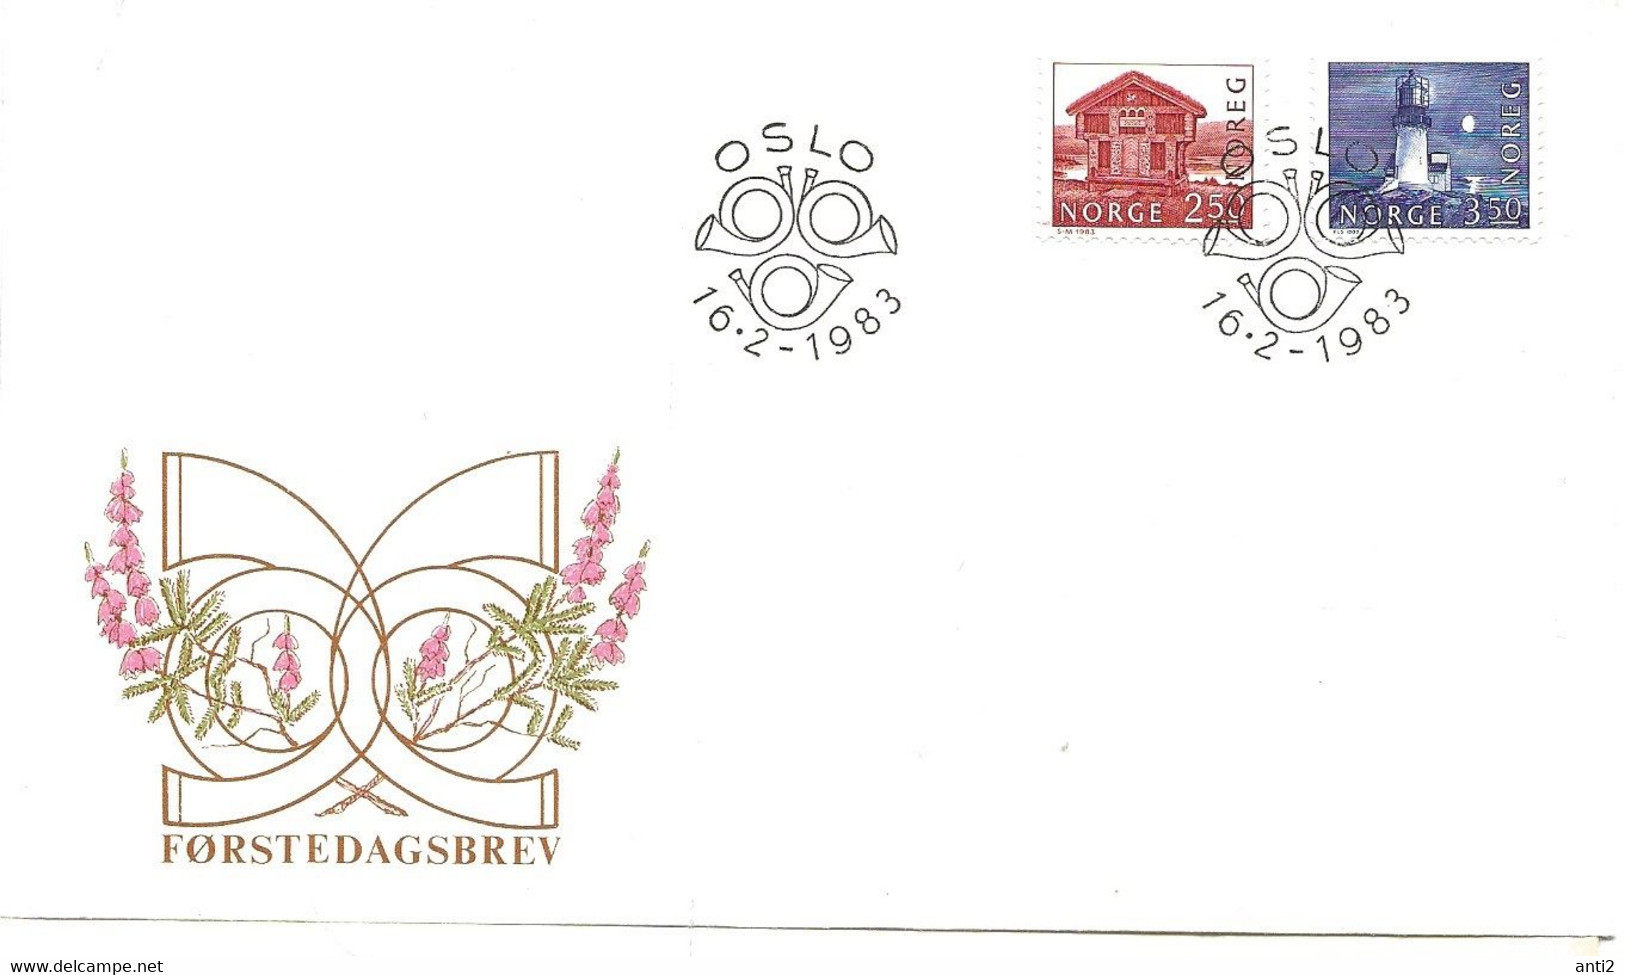 Norge Norway 1983 Buildings, Mi 876-877, FDC - Covers & Documents